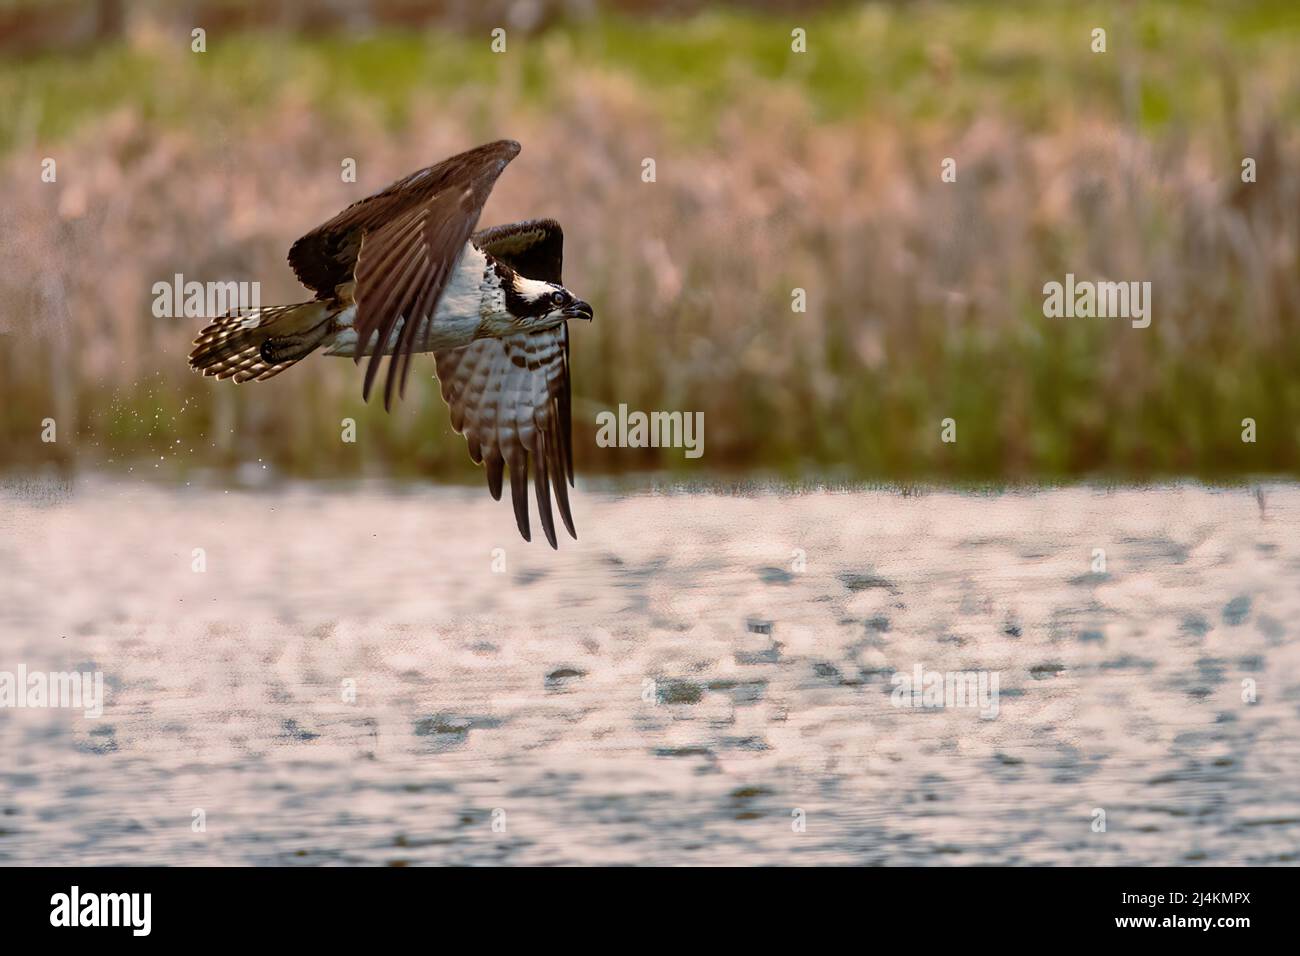 Osprey flying low to the water after missing a fish, showing water still dripping from tail feathers.  Captured in Shasta County, California, USA. Stock Photo